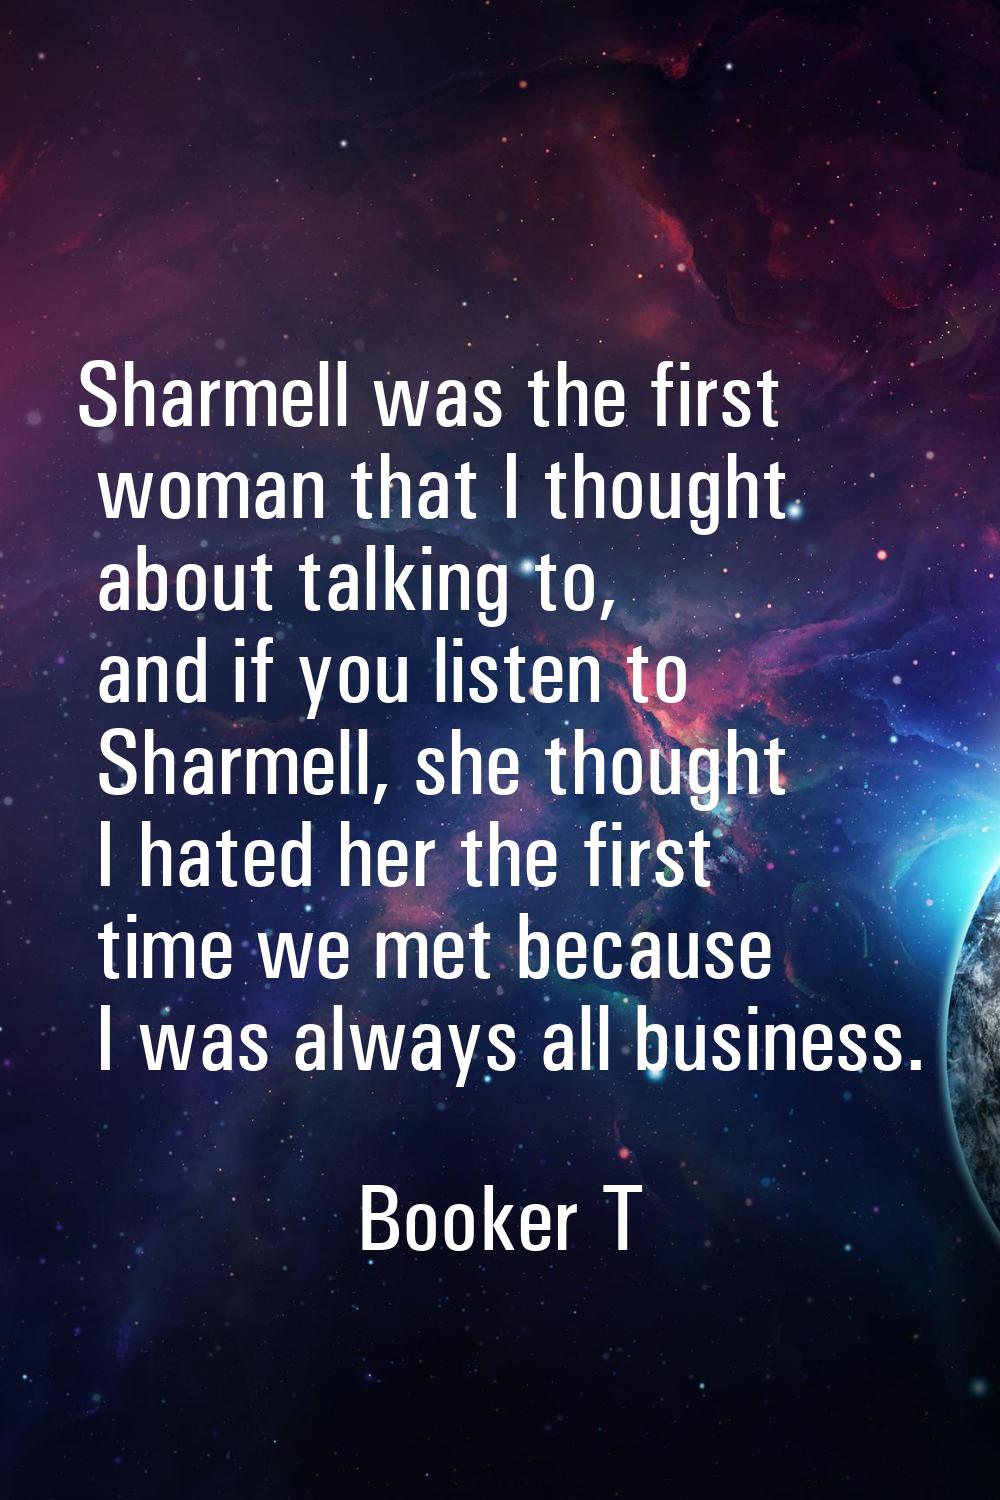 Sharmell was the first woman that I thought about talking to, and if you listen to Sharmell, she th